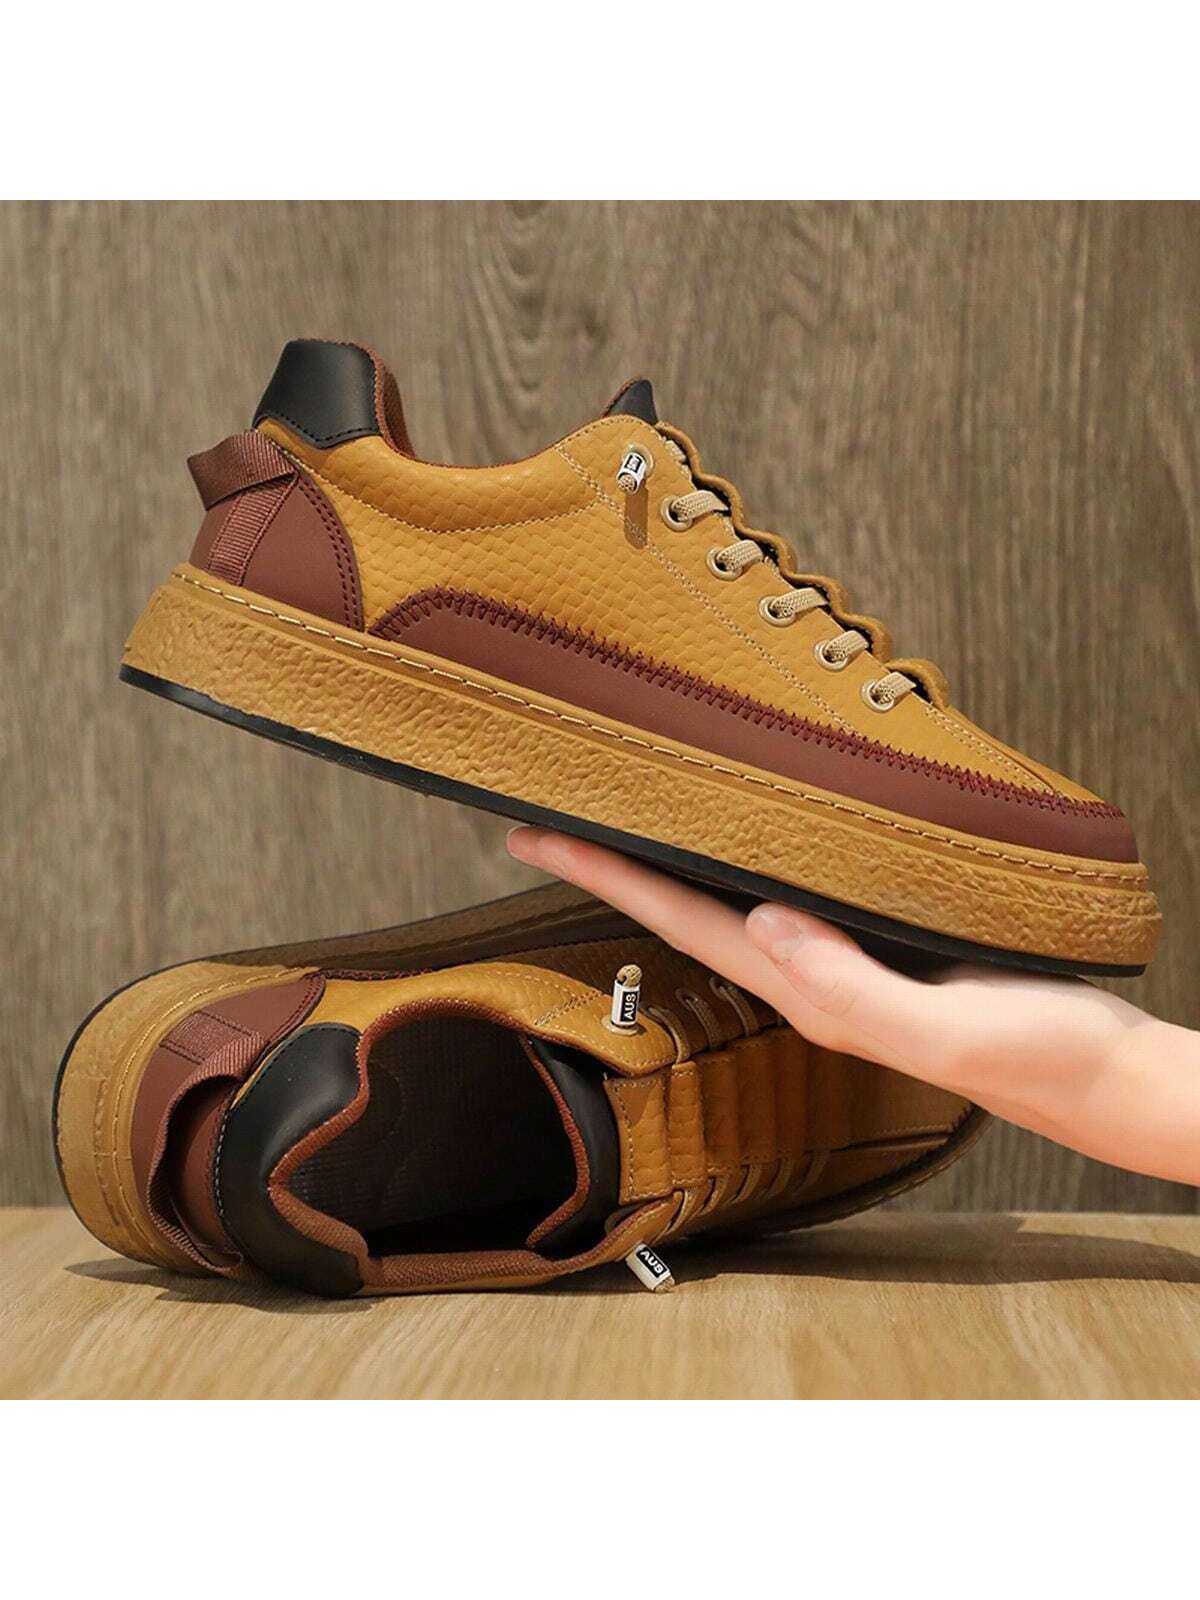 Slip-On Men's Shoes, Casual Thick-Soled Board Shoes, Trendy Leather Surface, Simple And Fashionable, For Autumn And Winter